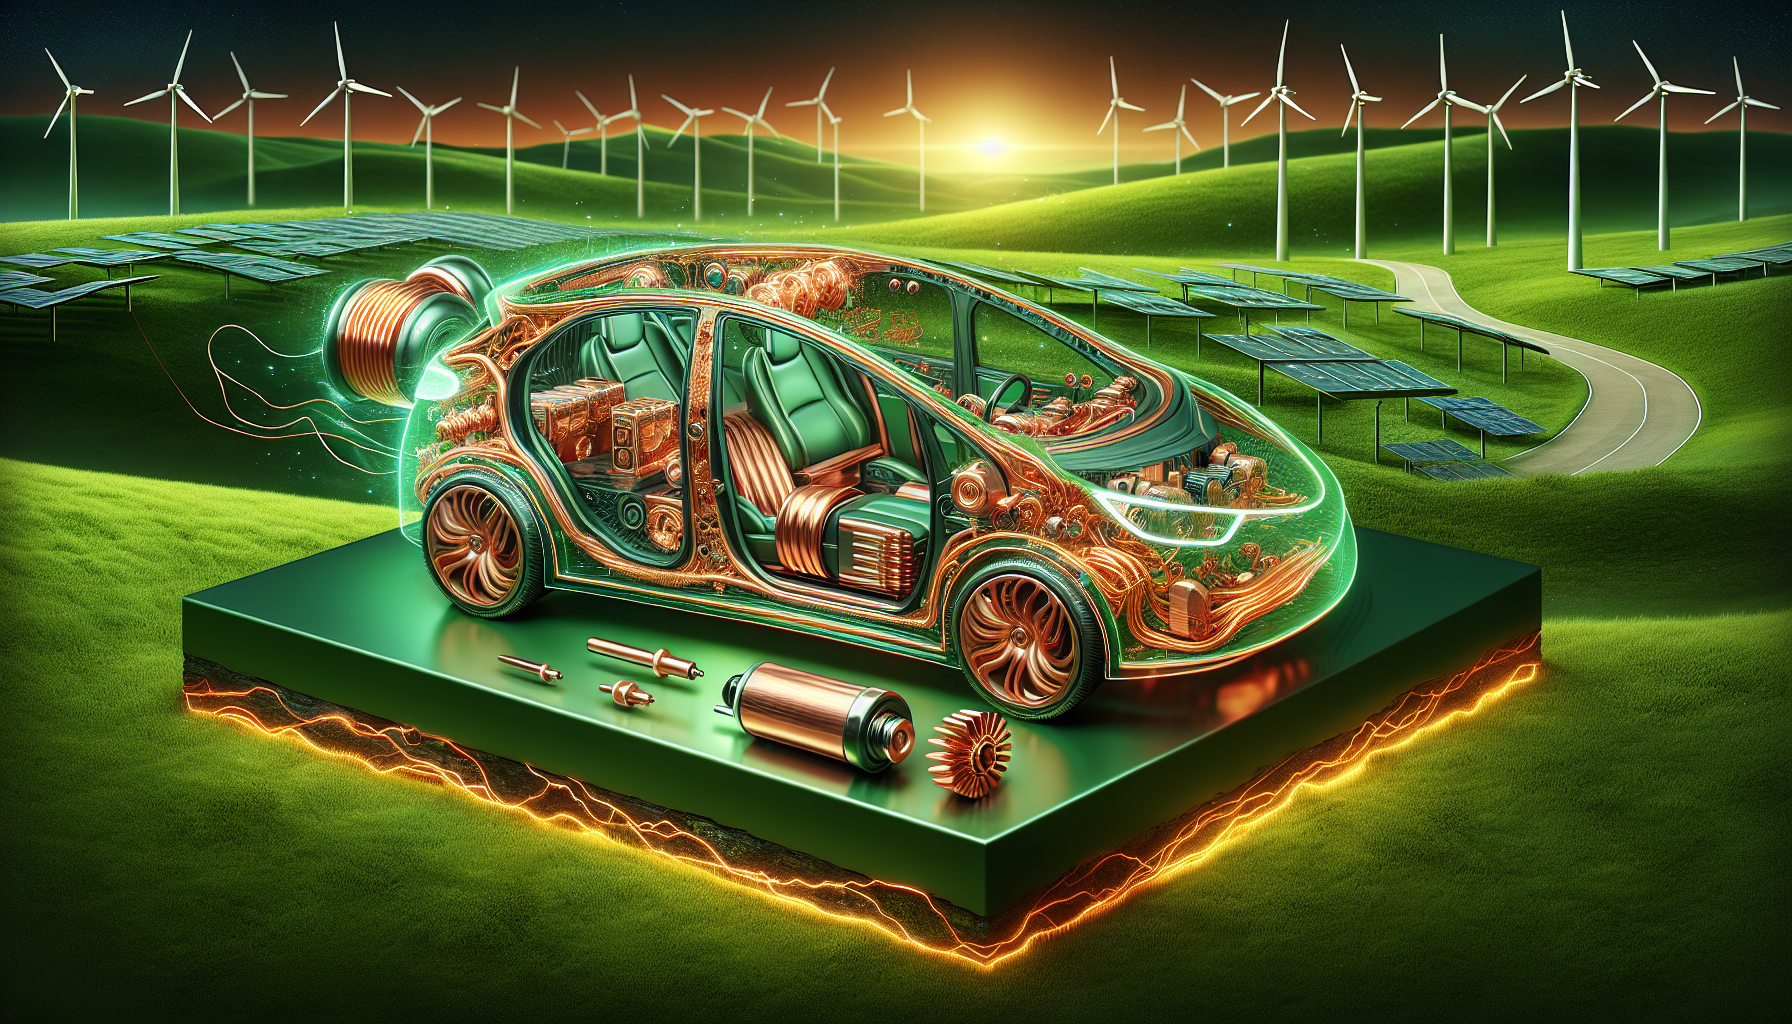 Illustration of the significance of copper in electric vehicles